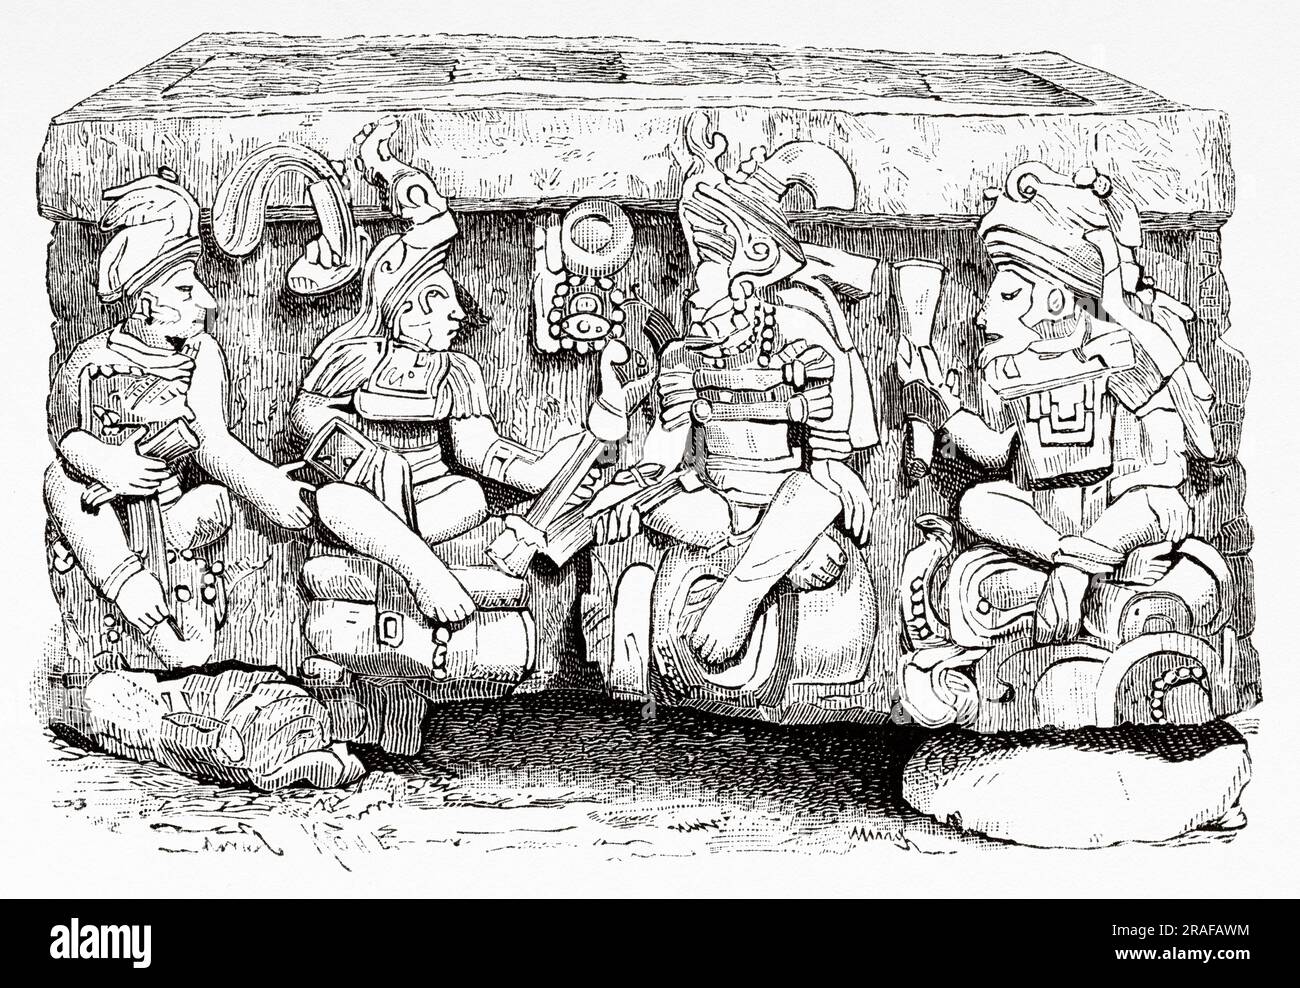 West Court. Altar Q, Copan archaeological site. Honduras. Central America. Trip To The Yucatan And The Land Of The Lacandons By Désiré Charnay 1880. Old 19th century engraving from Le Tour du Monde 1906 Stock Photo